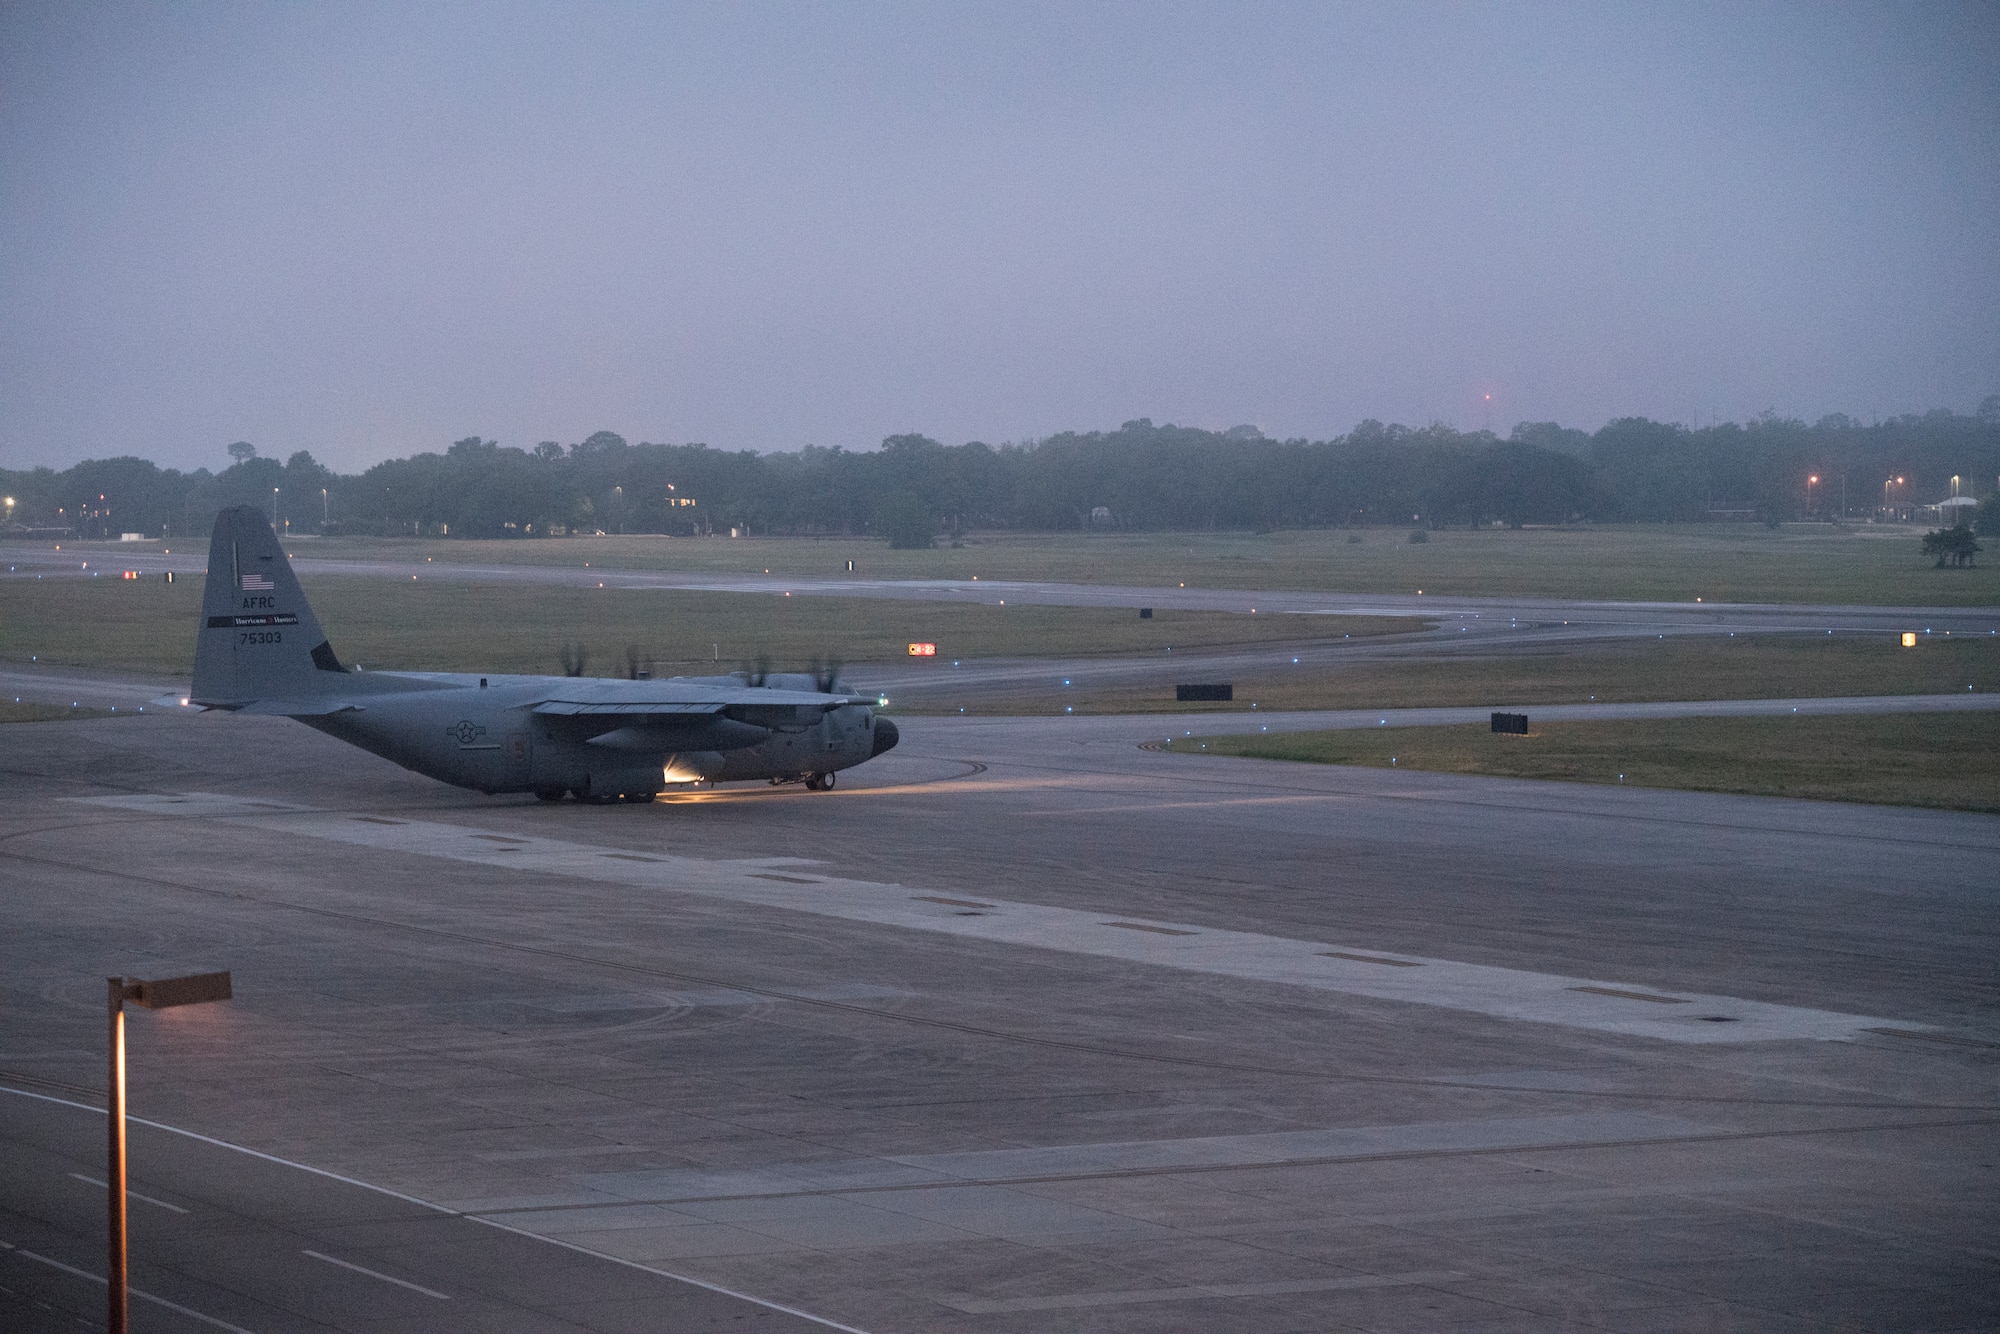 A WC-130J Super Hercules aircraft from 53rd Weather Reconnaissance Squadron taxis to the runway May 16, at Keesler Air Force Base, Miss. The Hurricane Hunters departed today on their first storm tasking of the 2020 Atlantic hurricane season to investigate an area for possible development into a tropical depression or storm near the Bahamas. (U.S. Air Force photo by Tech. Sgt. Christopher Carranza)